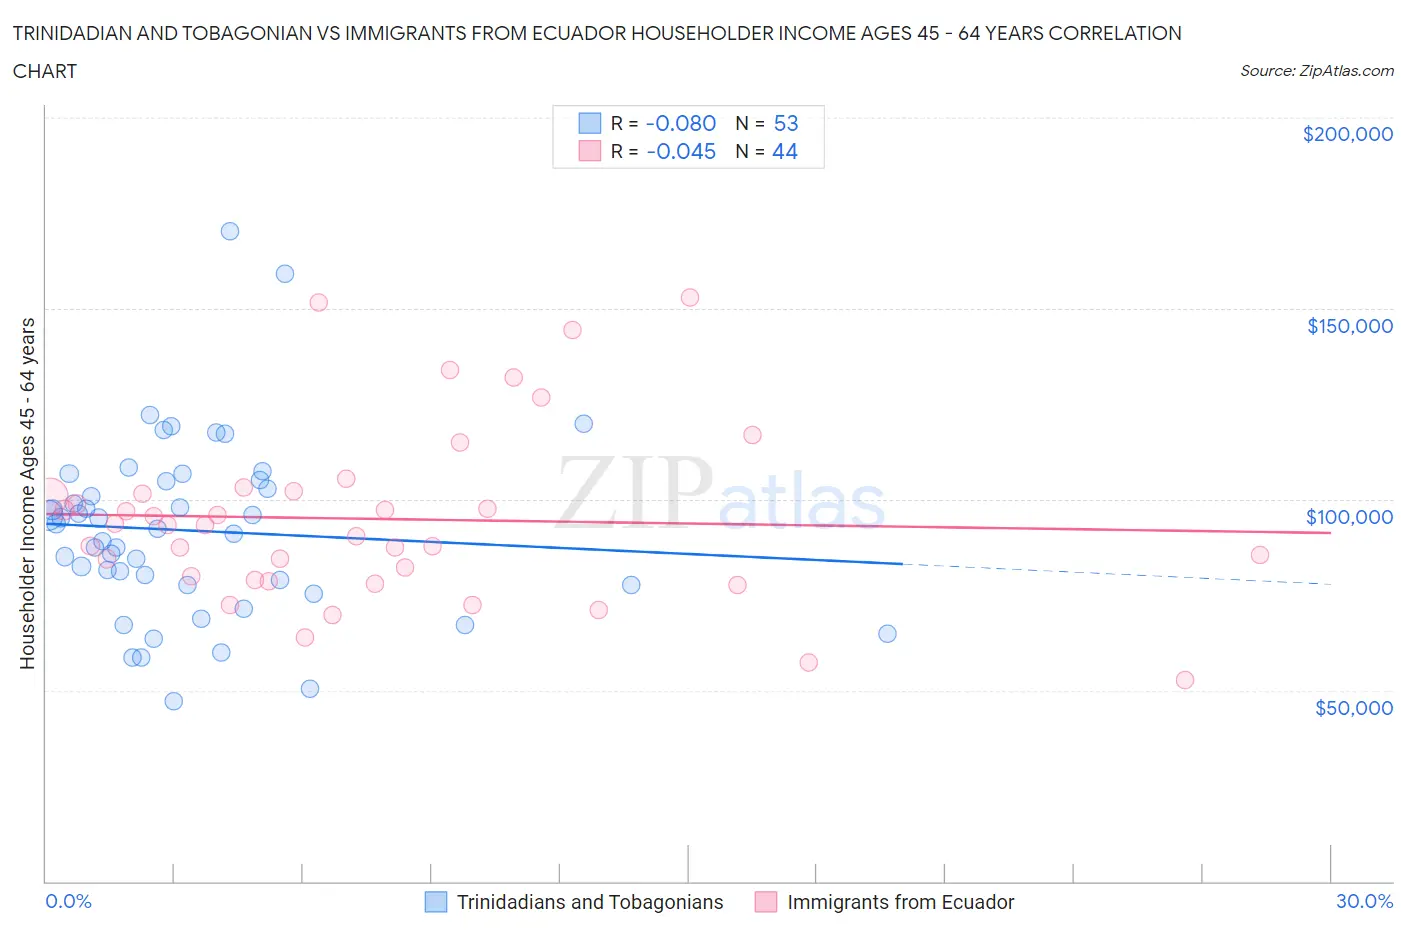 Trinidadian and Tobagonian vs Immigrants from Ecuador Householder Income Ages 45 - 64 years